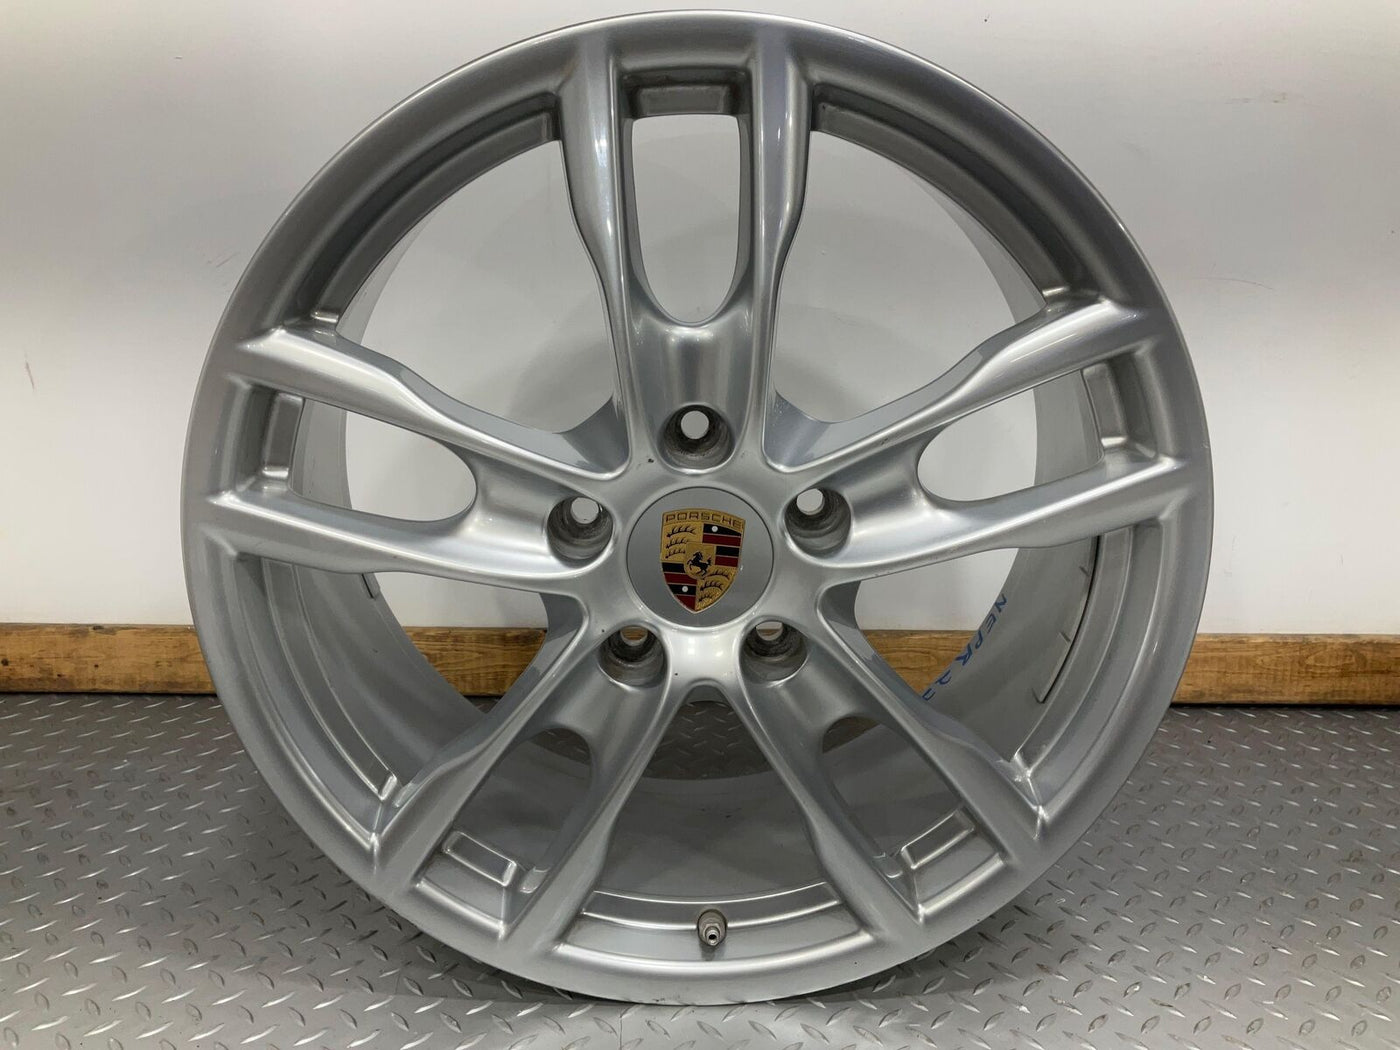 13-16 Porsche Boxster S Set of 4 Staggered 19x8 57mm & 19x9.5 45mm Silver Wheels